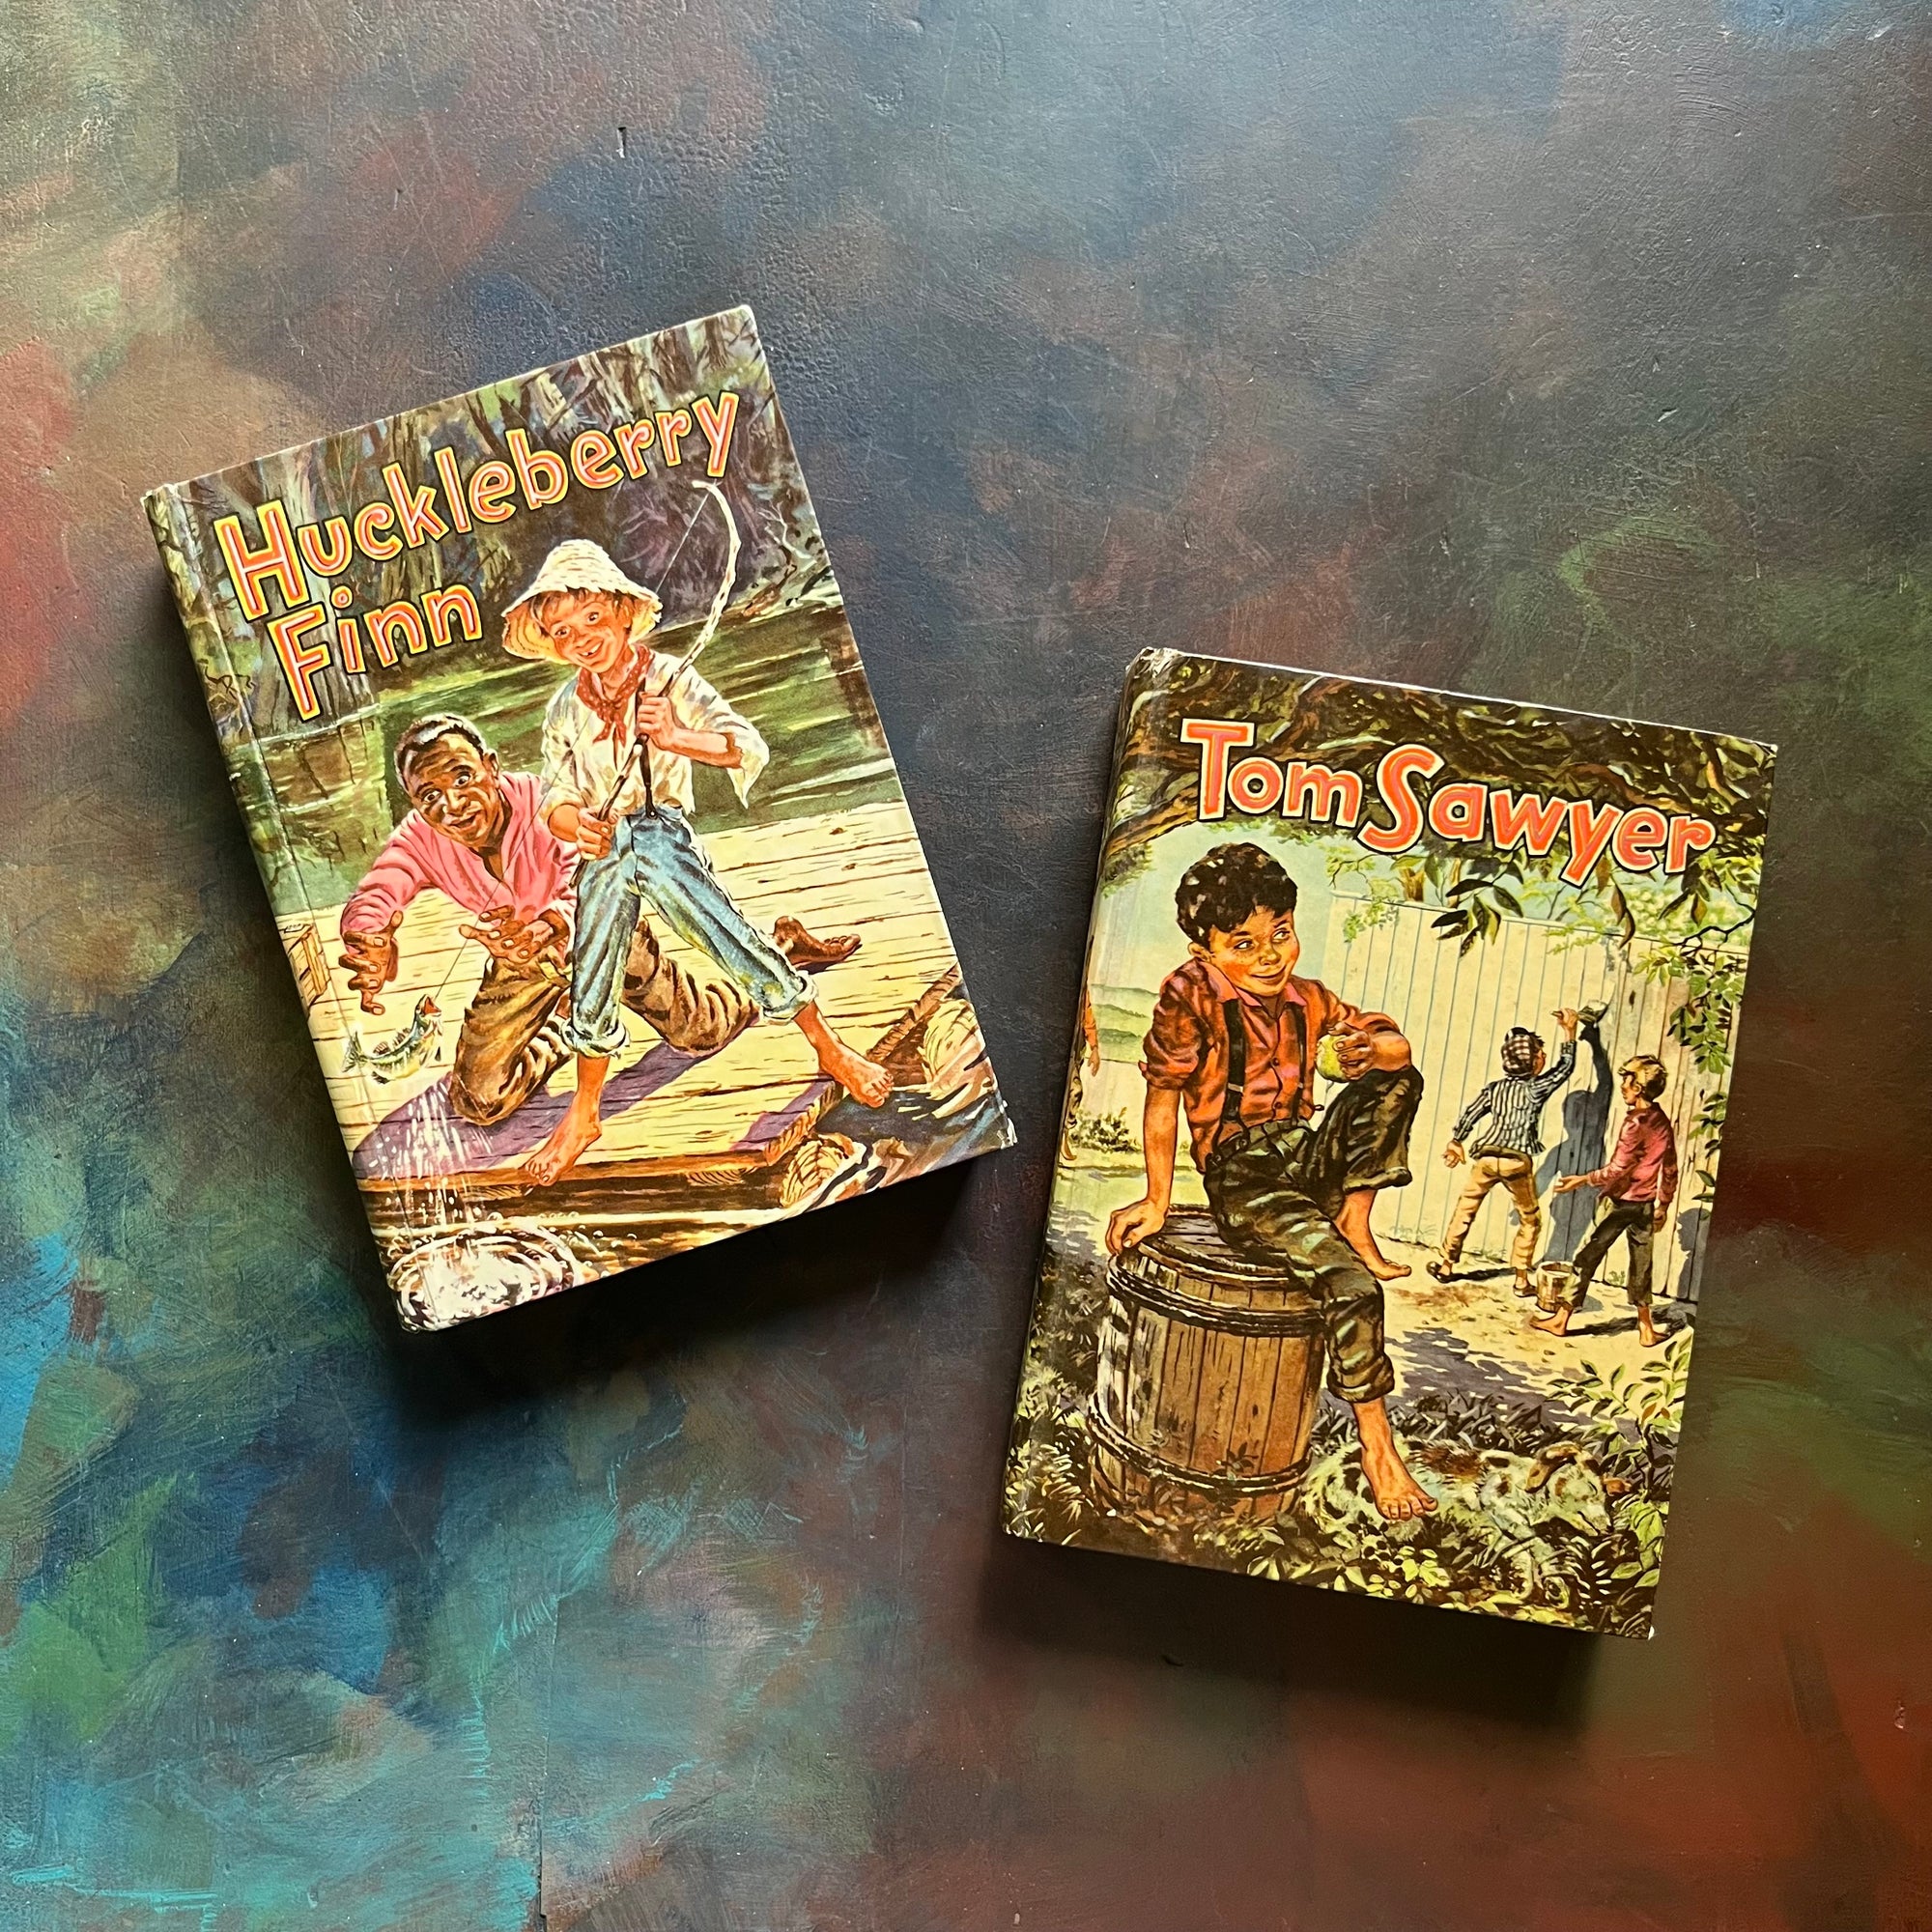 Pair of Mark Twain Books by Whitman Publishers-Huckleberry Finn & Tom Sawyer-vintage adventure books for kids-Samuel L. Clemens-Whitman Publishing-1955-view of the front covers